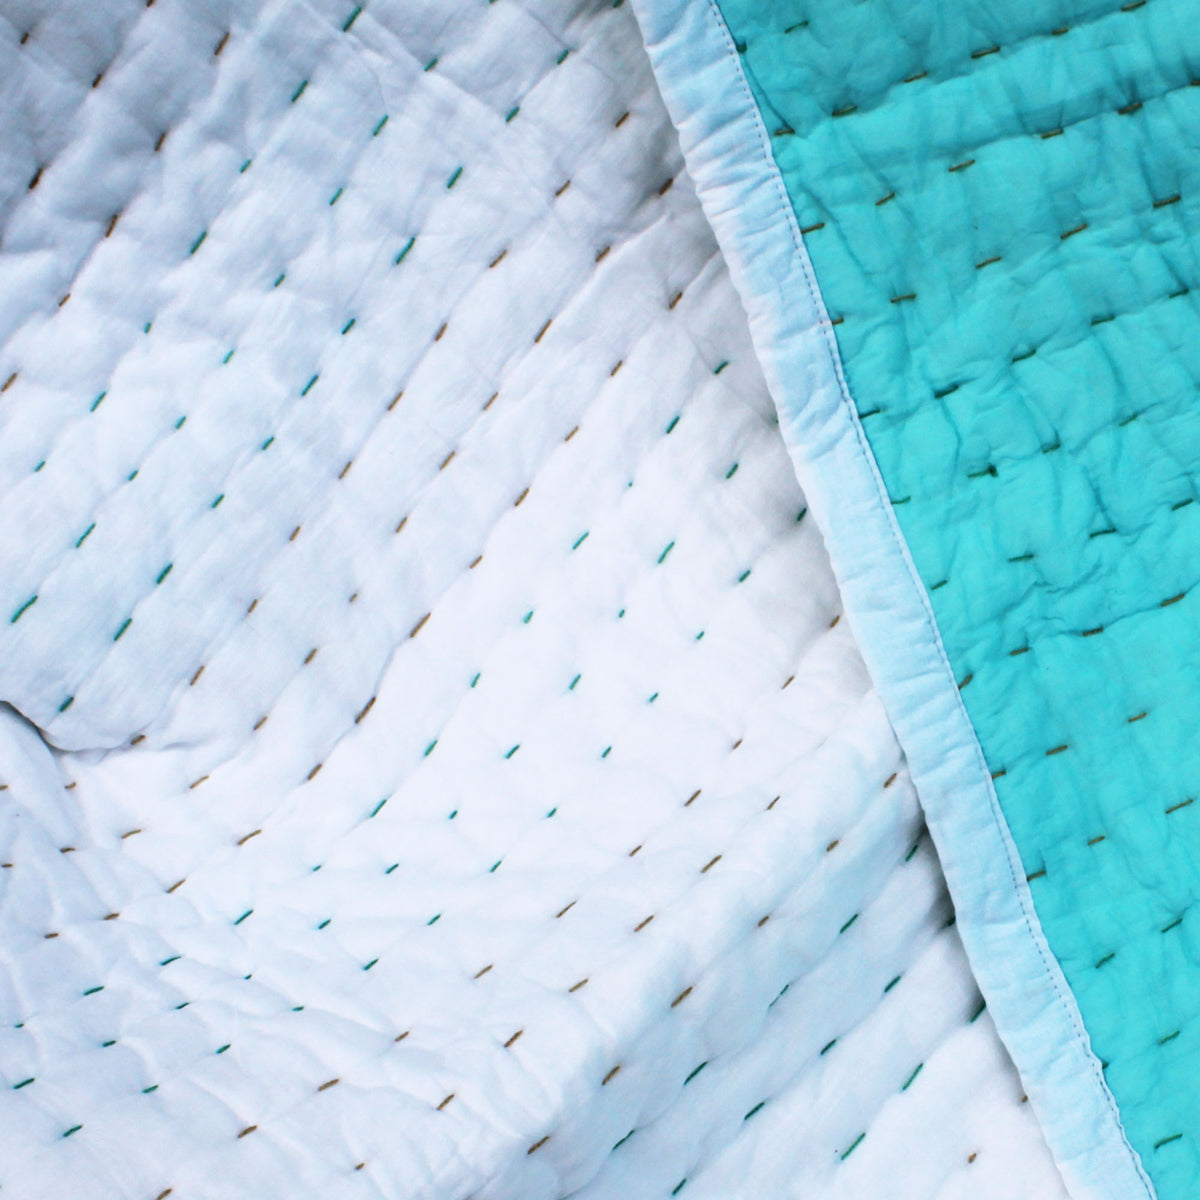 White & Light Blue Cotton Quilted Soft Baby Kantha Quilt